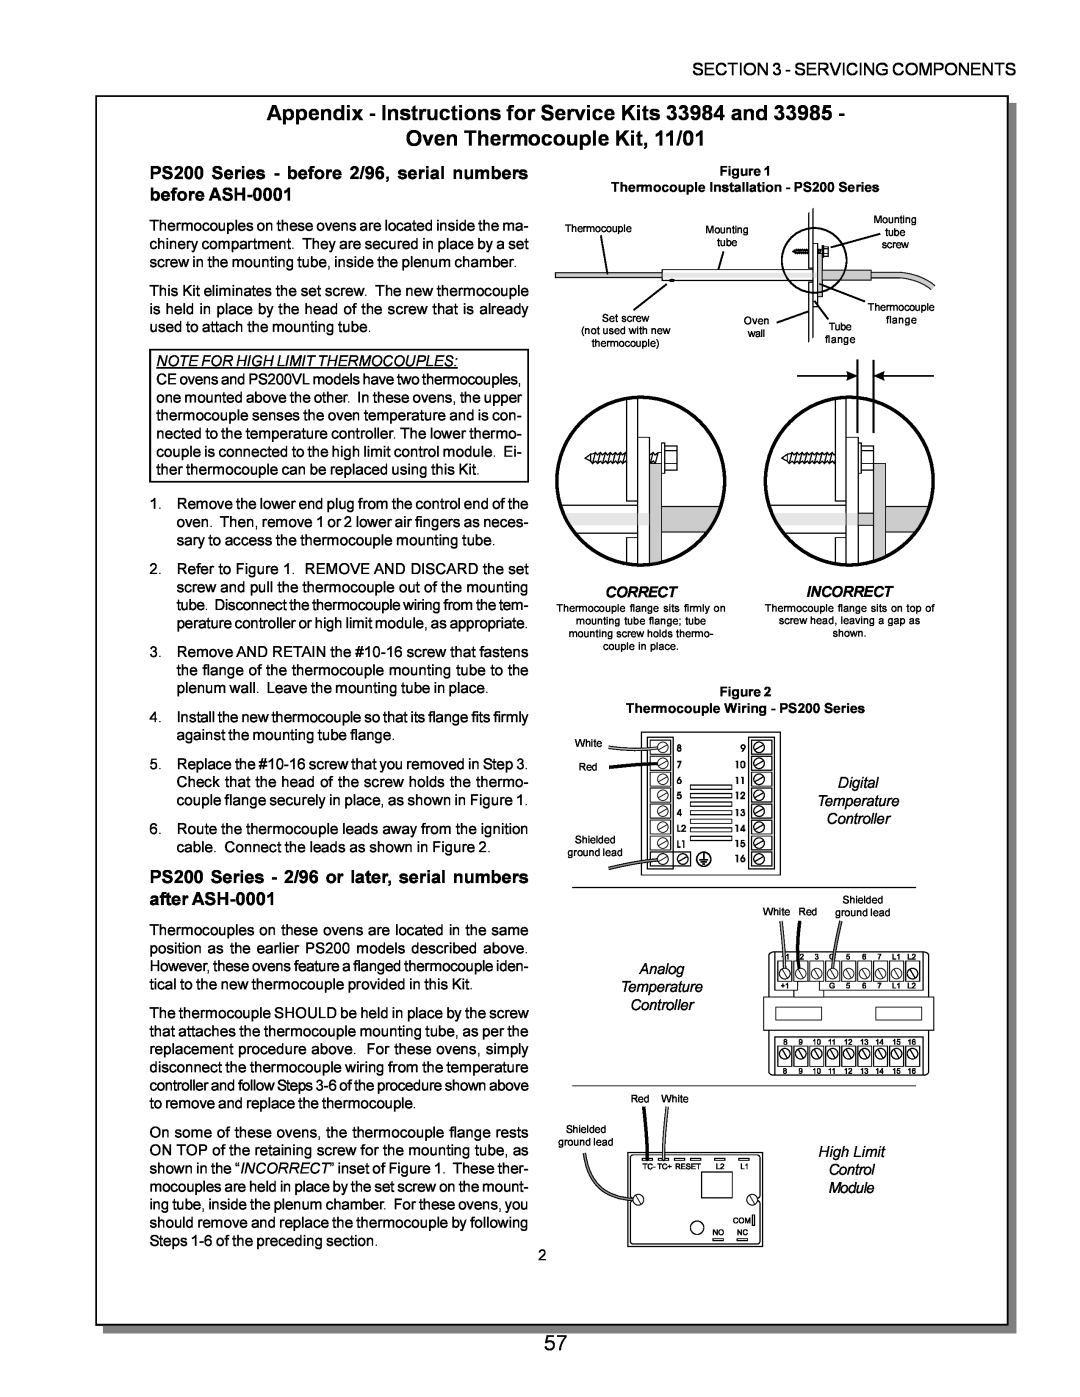 Middleby Marshall PS220, PS570, PS360 manual Appendix - Instructions for Service Kits 33984 and, Oven Thermocouple Kit, 11/01 